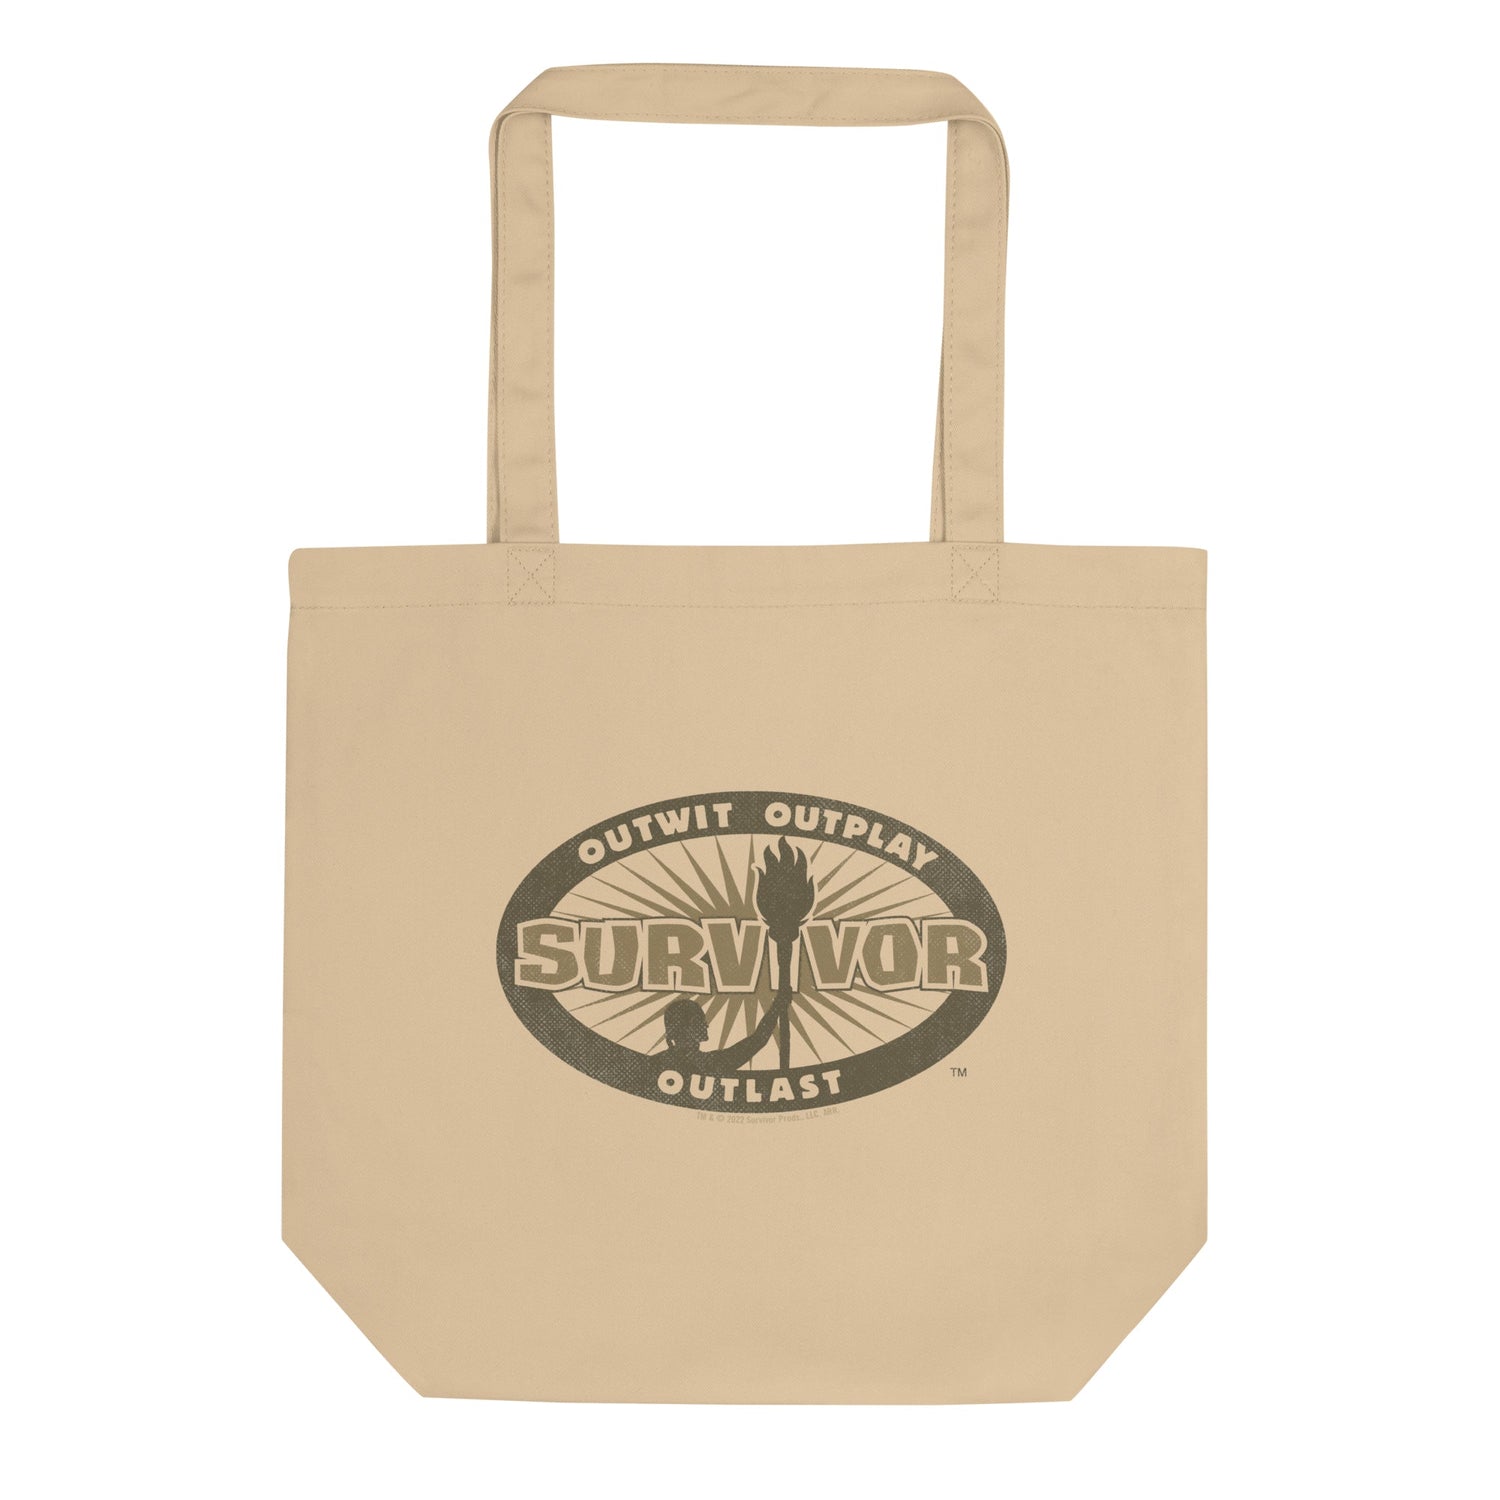 Survivor Outwit, Outplay, Outlast Large Eco Tote - Paramount Shop